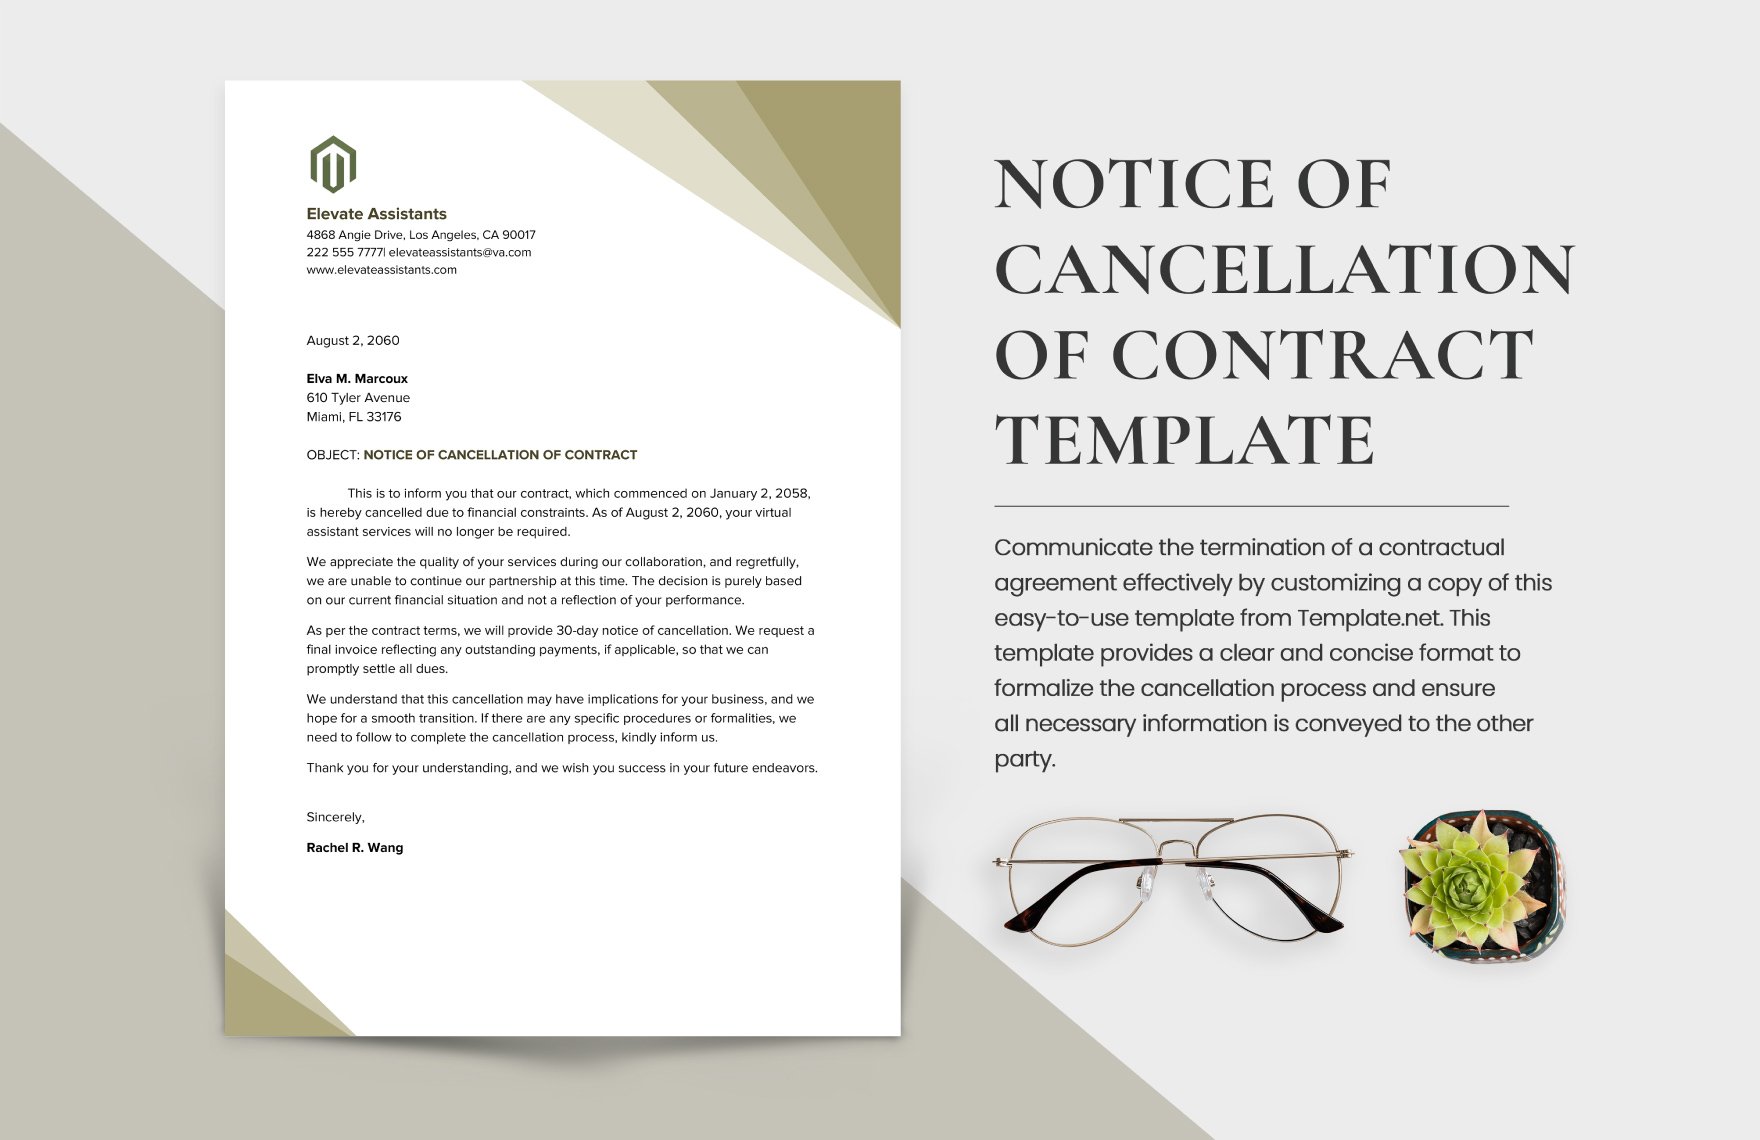 Notice of Cancellation of Contract Template